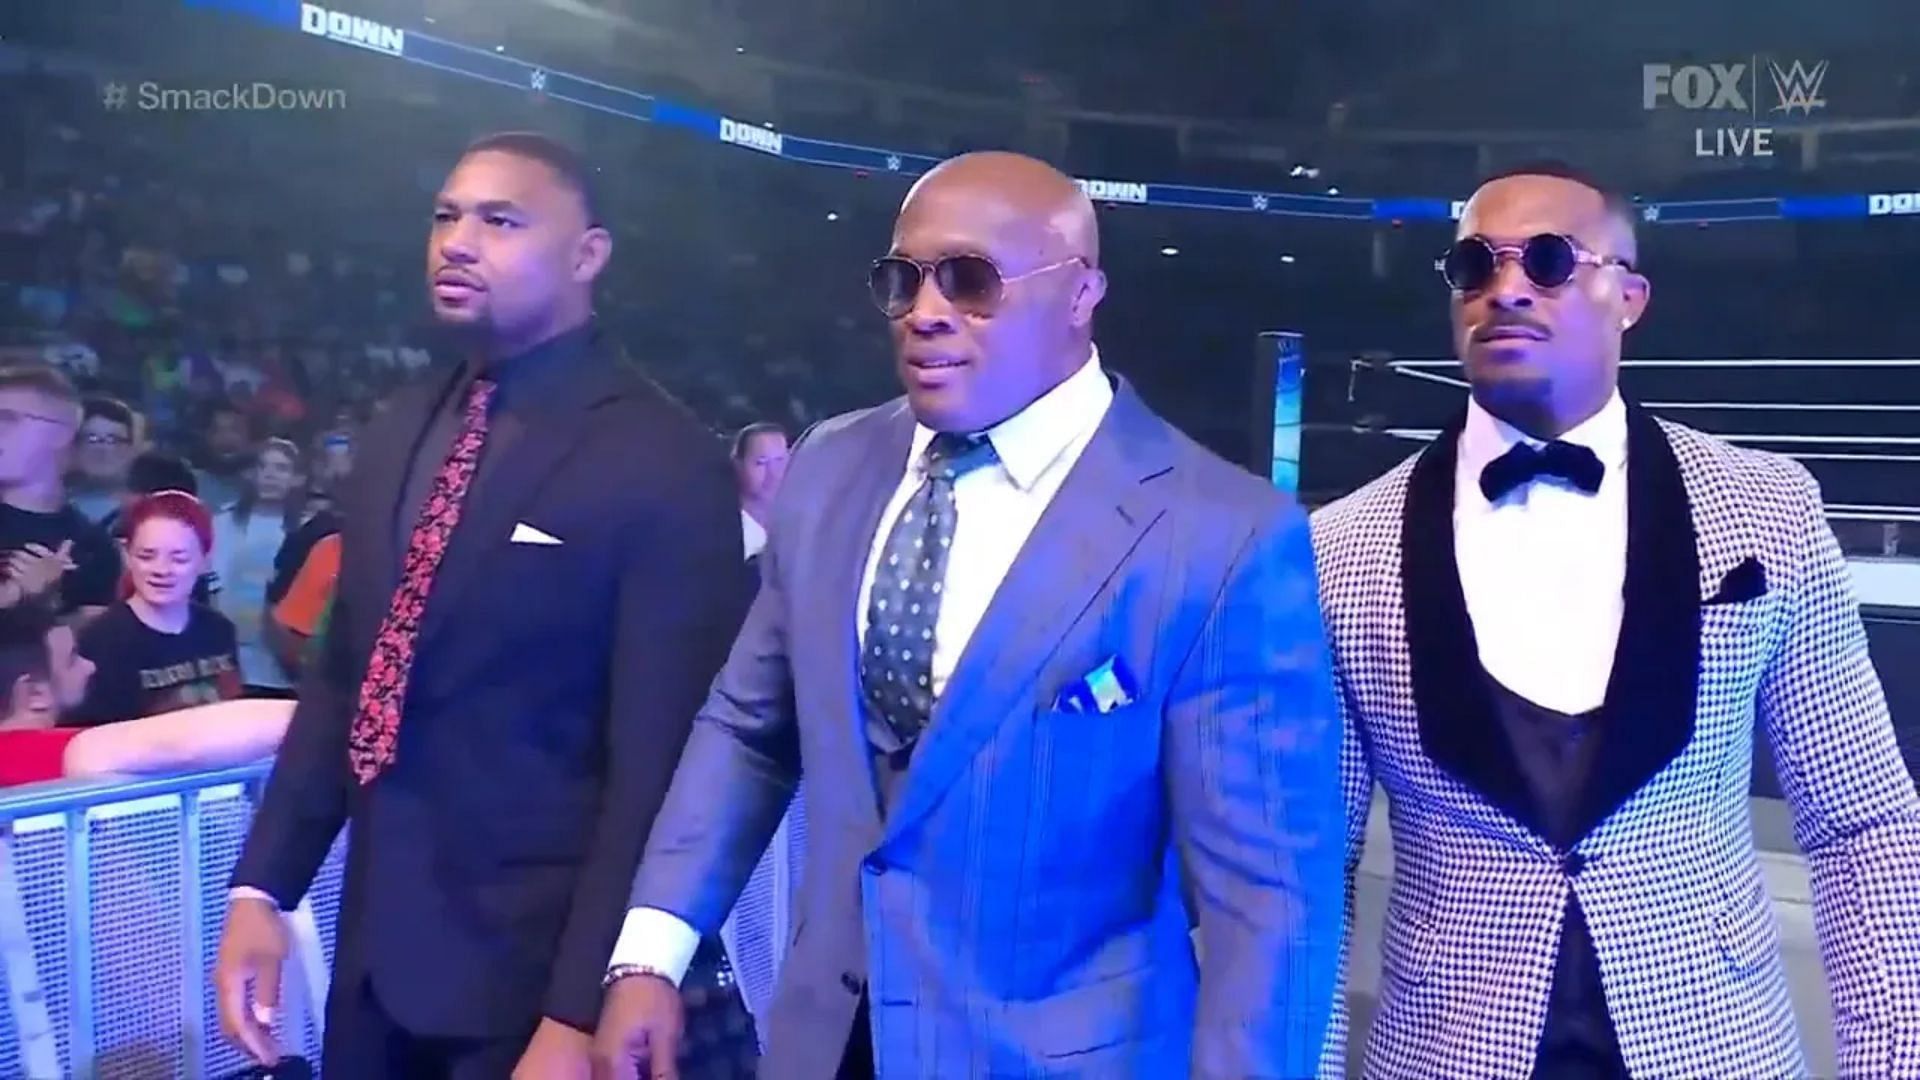 From left to right: Angelo Dawkins, Bobby Lashley and Montez Ford